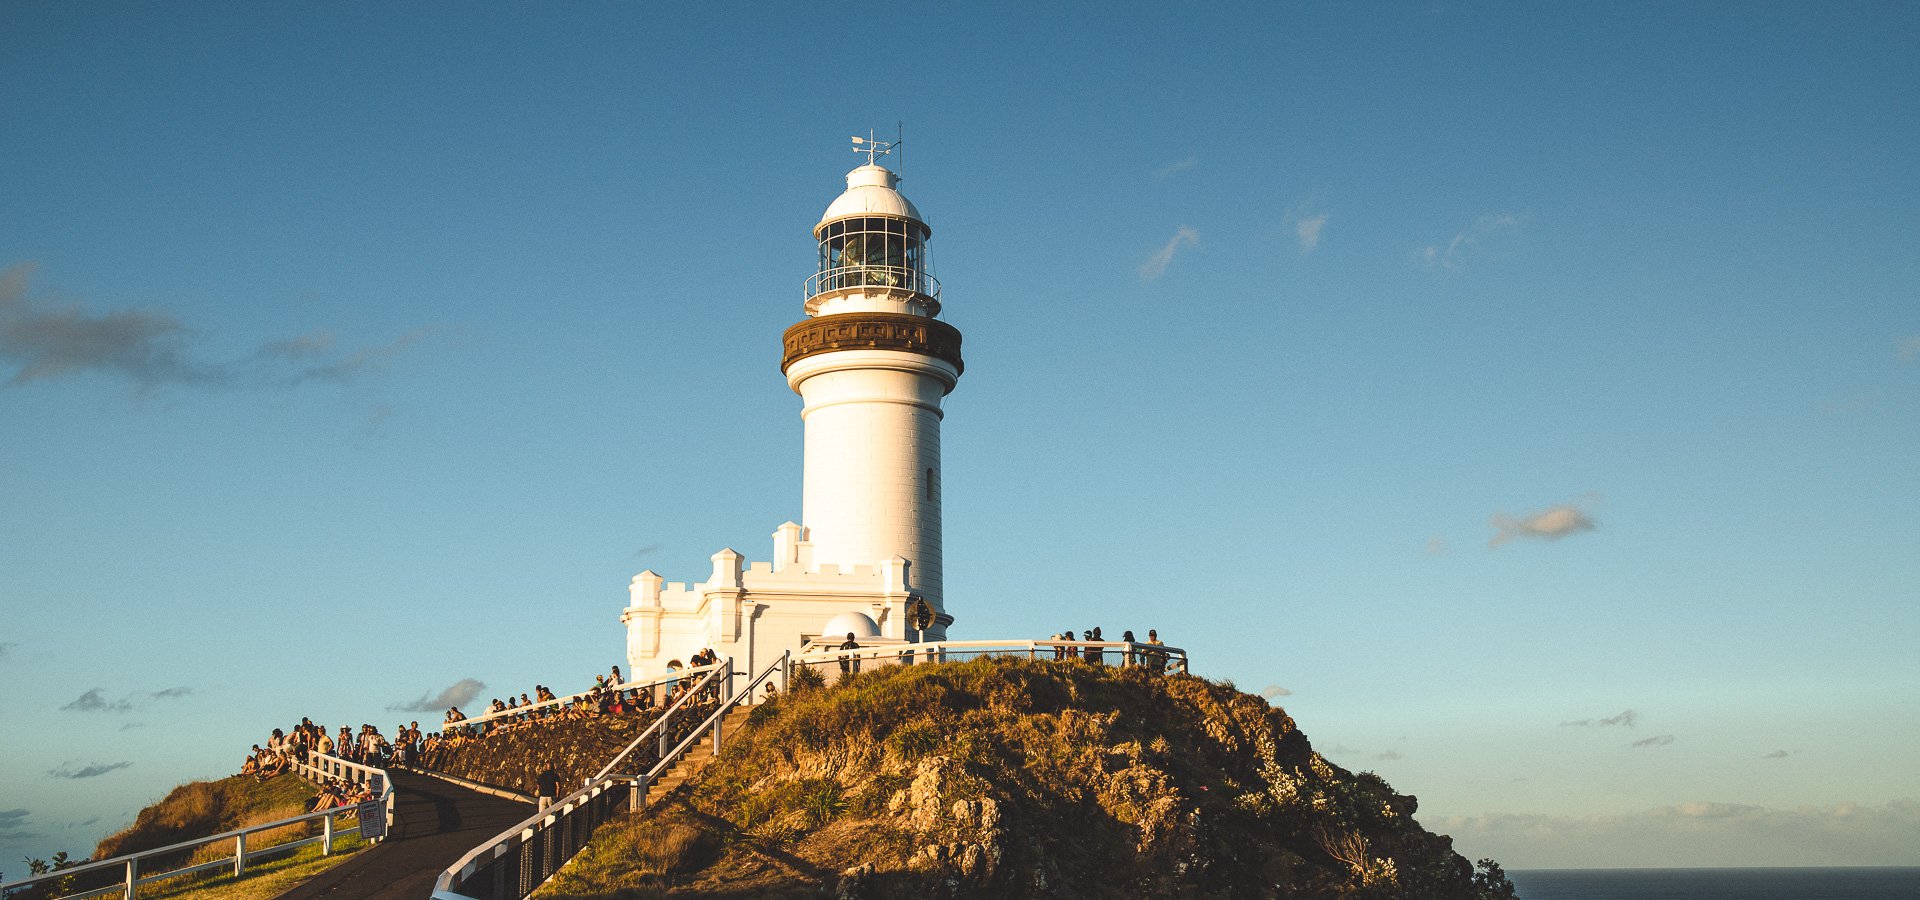 The Ultimate Byron Bay Travel Guide | byron bay travel guide 1